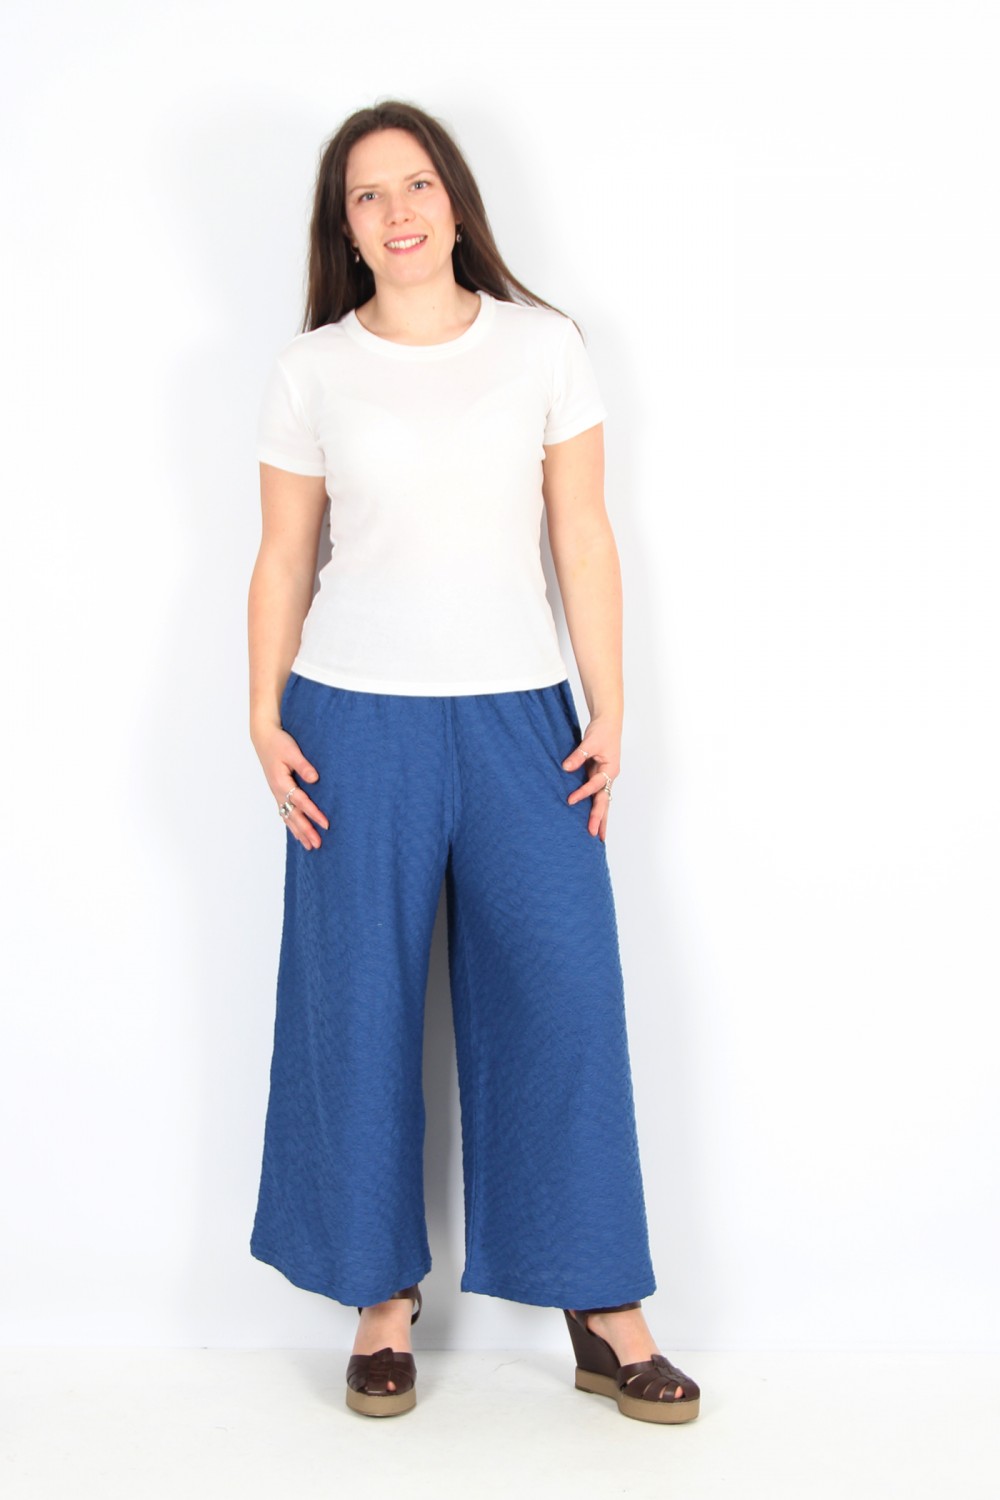 Neirami Clarinetto Cropped Wide Legged Textured Jersey Trouser Blue